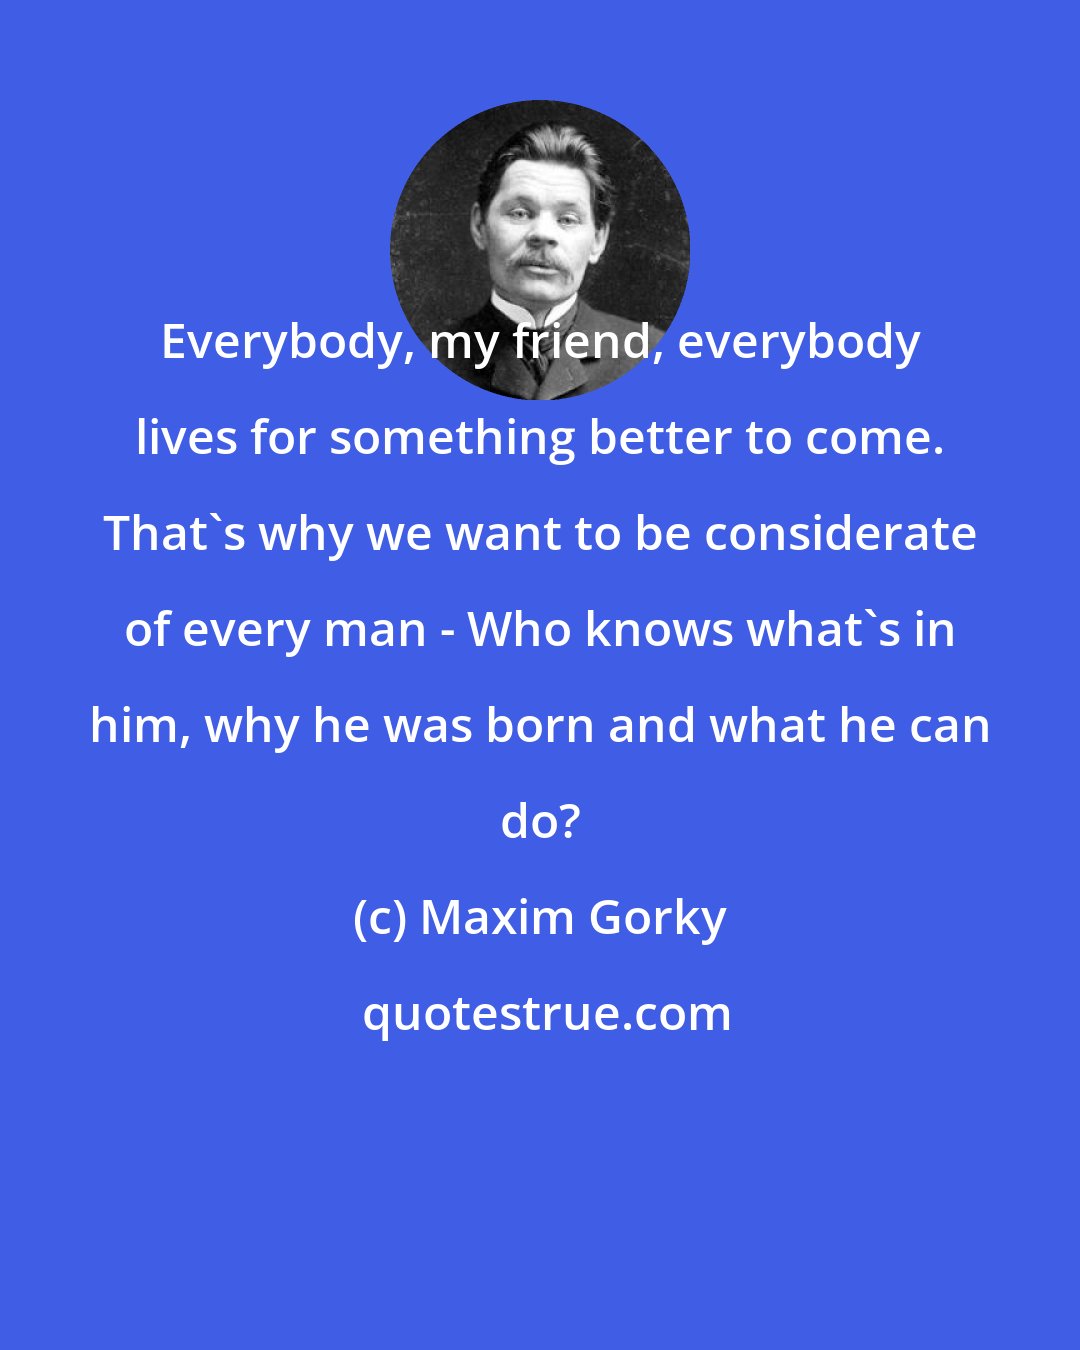 Maxim Gorky: Everybody, my friend, everybody lives for something better to come. That's why we want to be considerate of every man - Who knows what's in him, why he was born and what he can do?